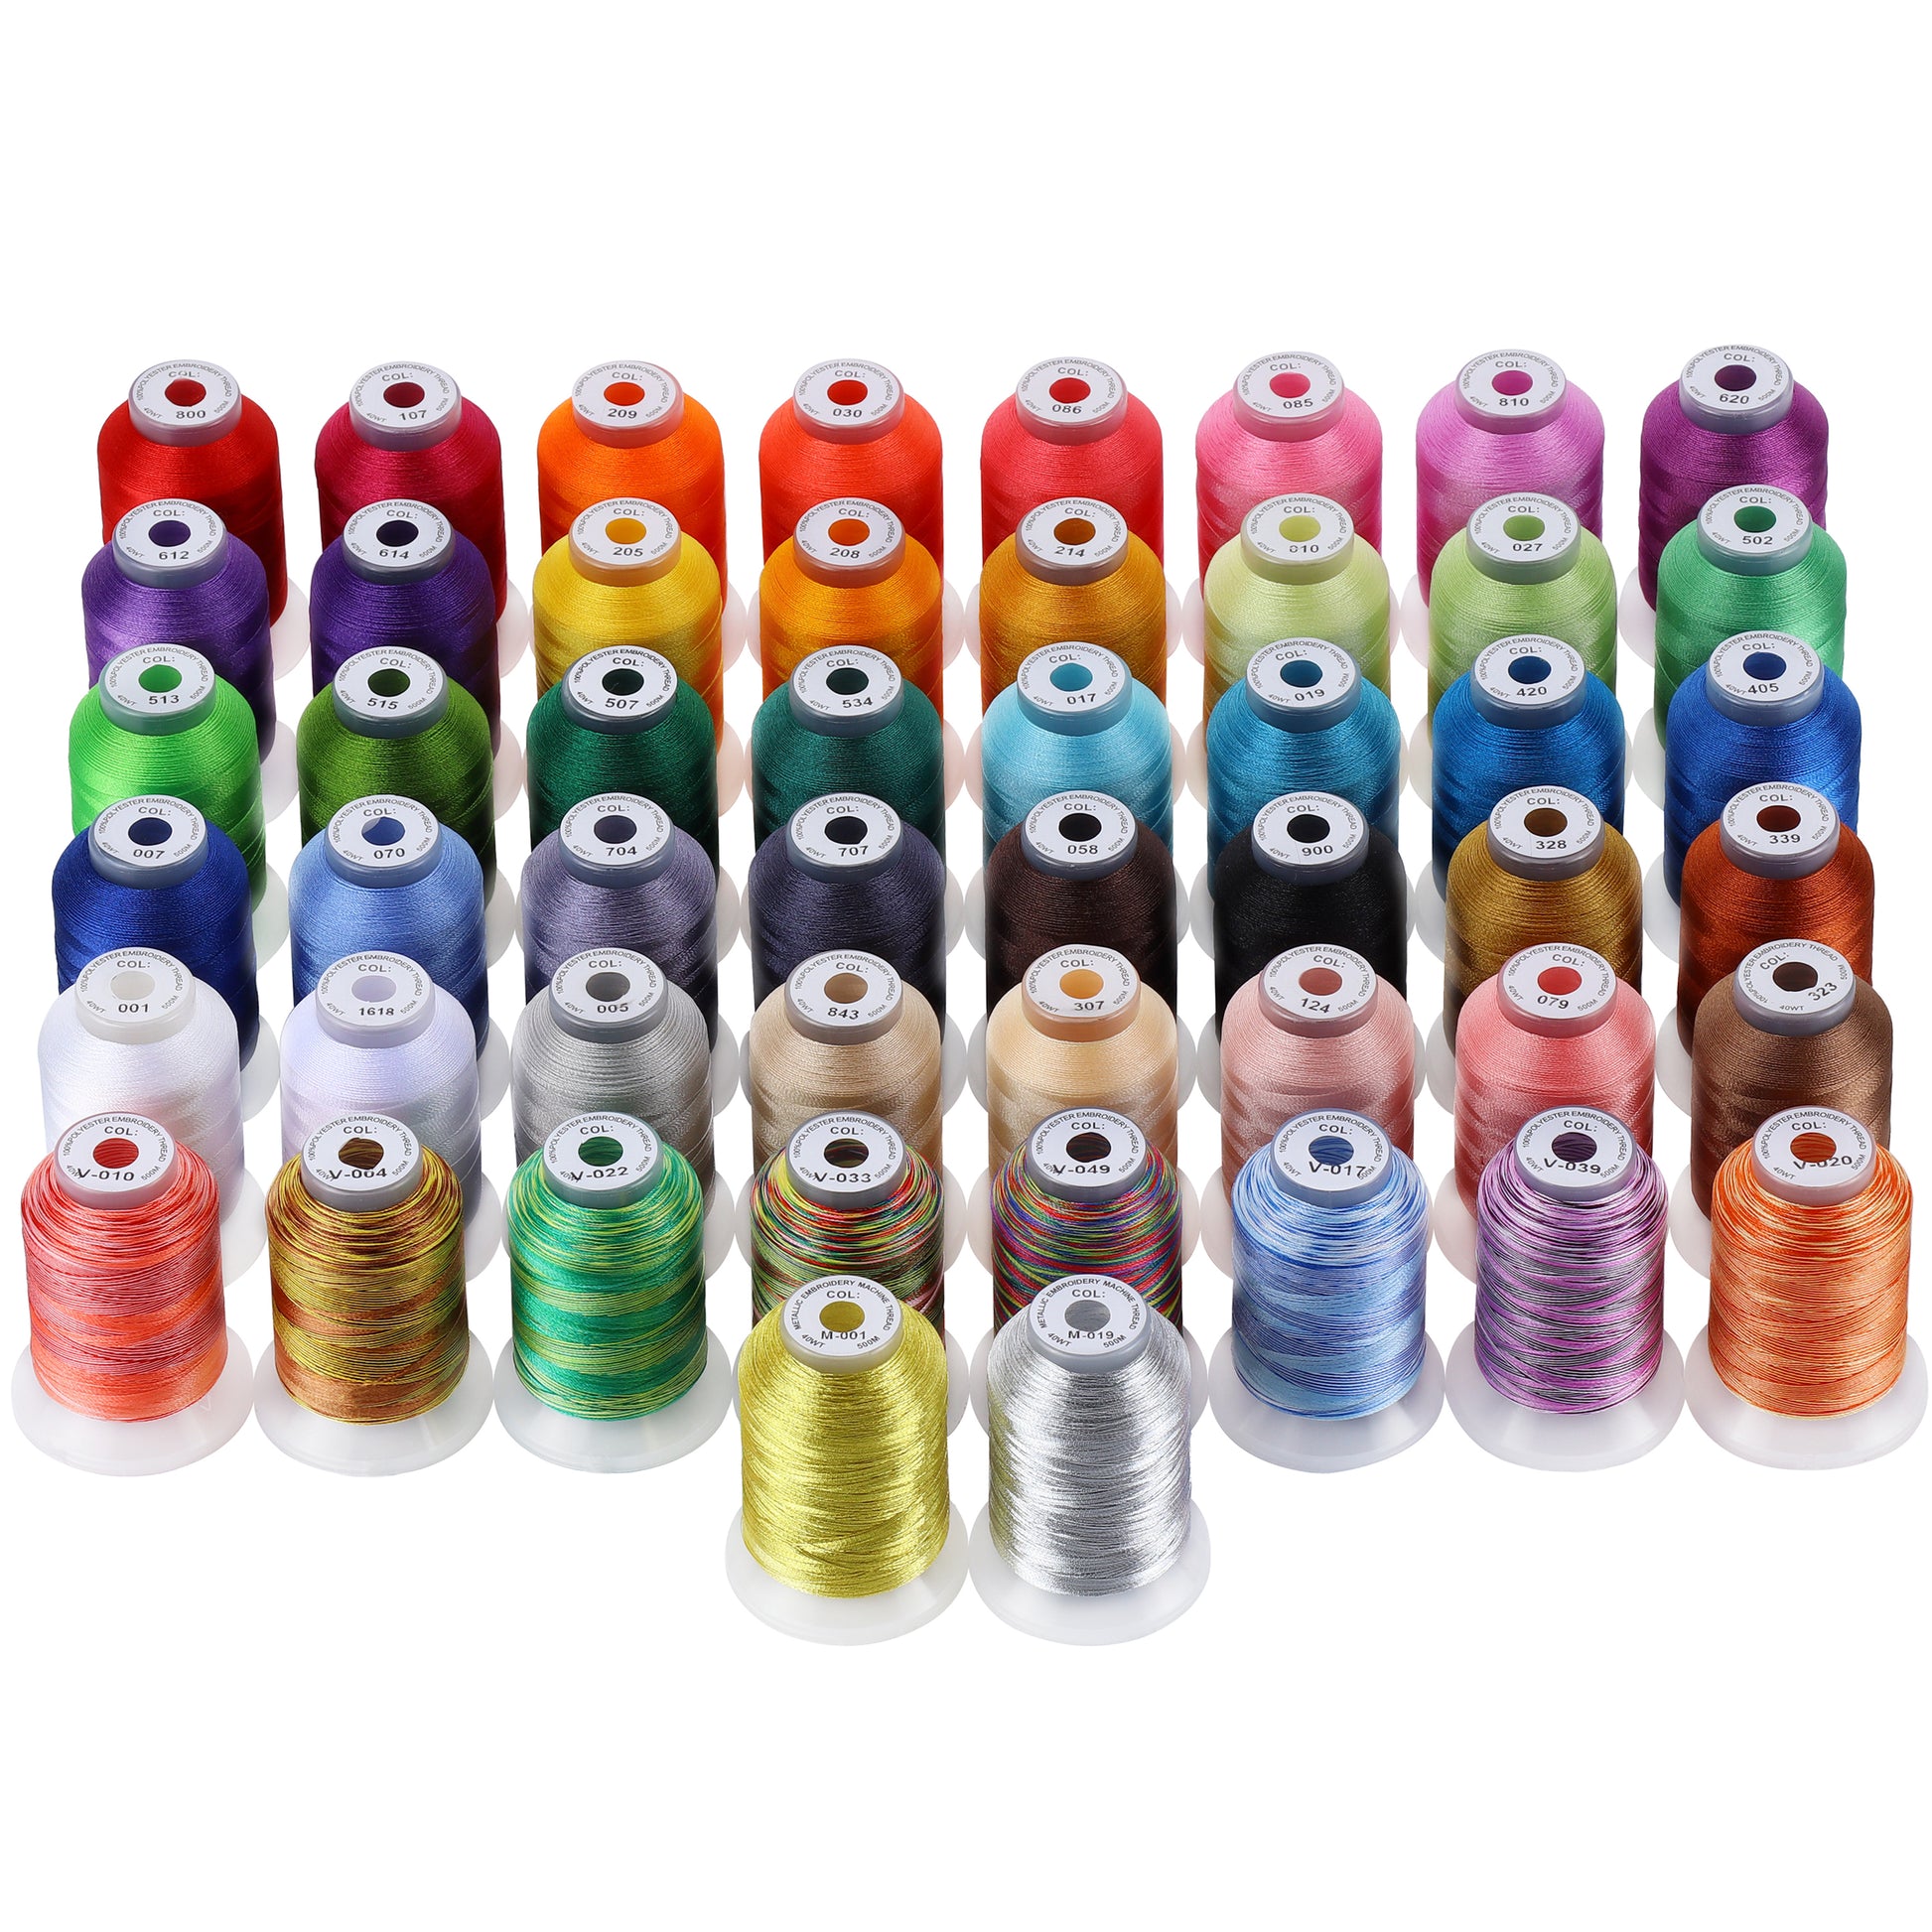 New Brothread 42 Spools 1000M (1100Y) Polyester Embroidery Machine Thread  Kit for Professional Embroiderer and Beginner